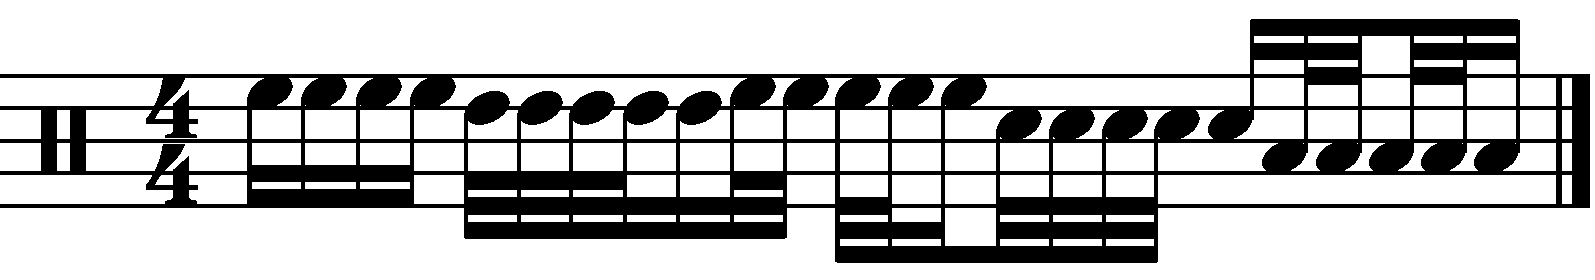 Syncopated 16th note 43333 fills with decorative 32nds